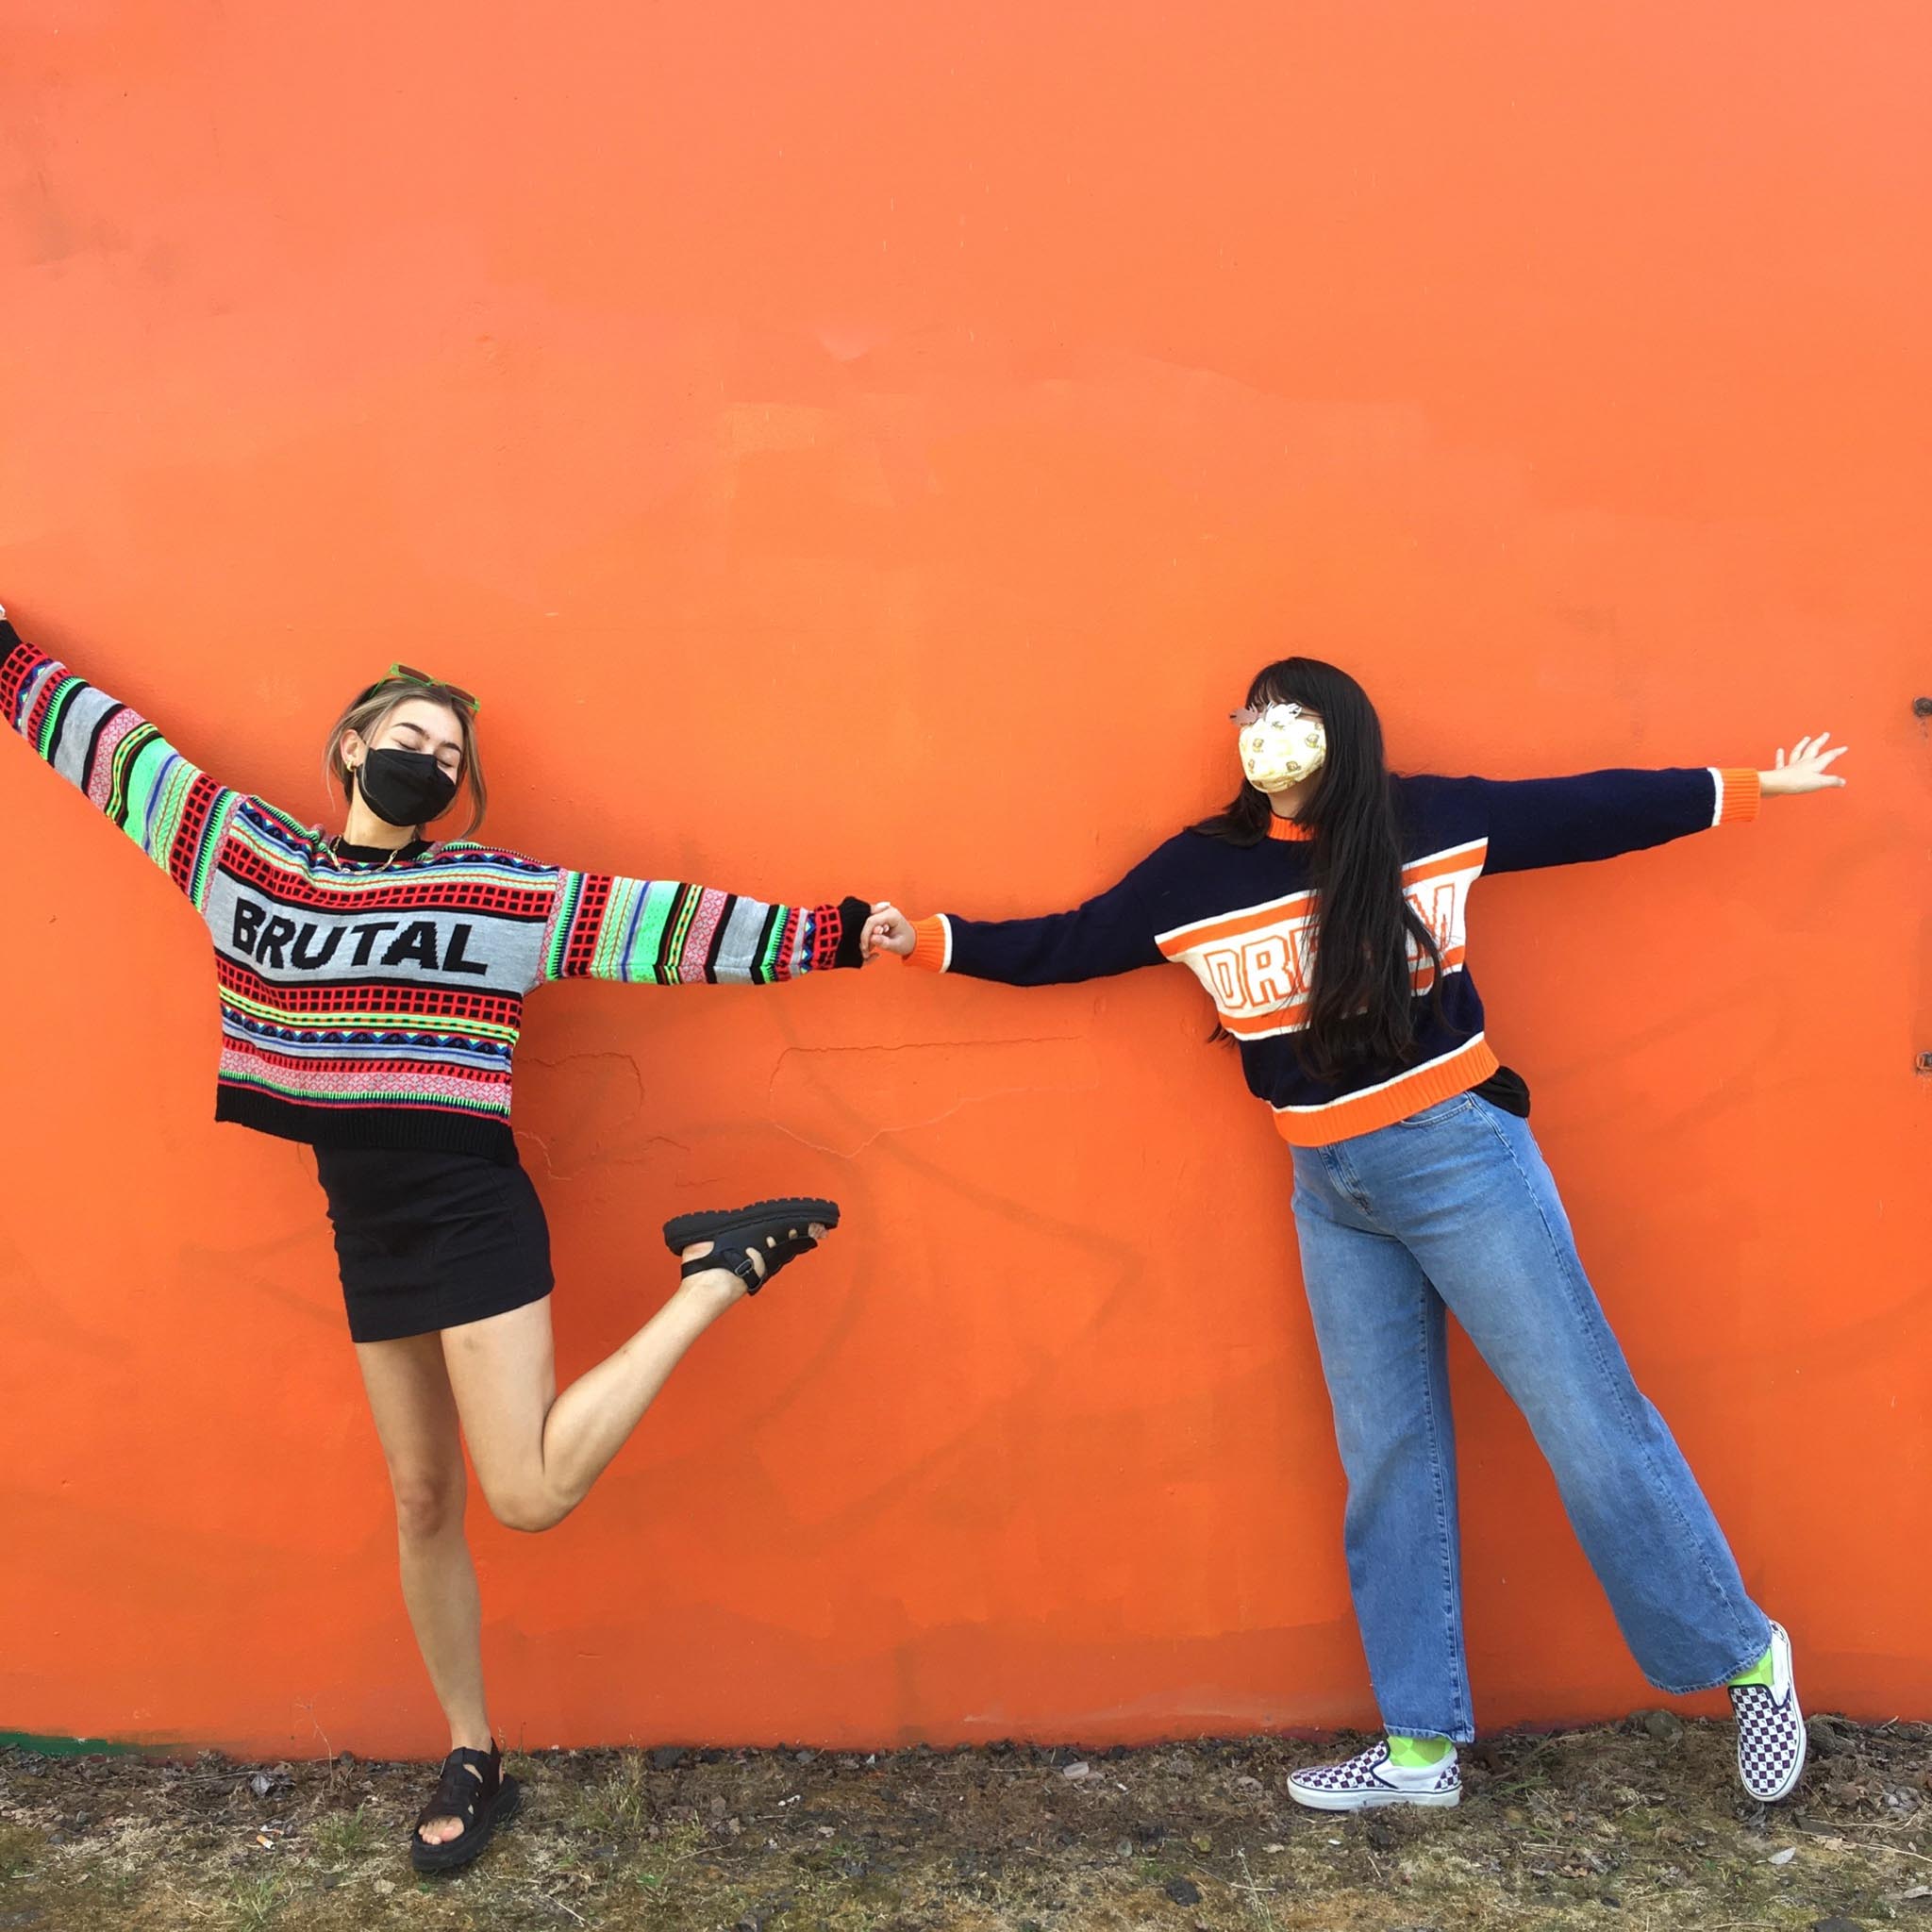 Two people posed holding hands wearing sweaters with intarsia stitching that reads "BRUTAL" and "DREAM"